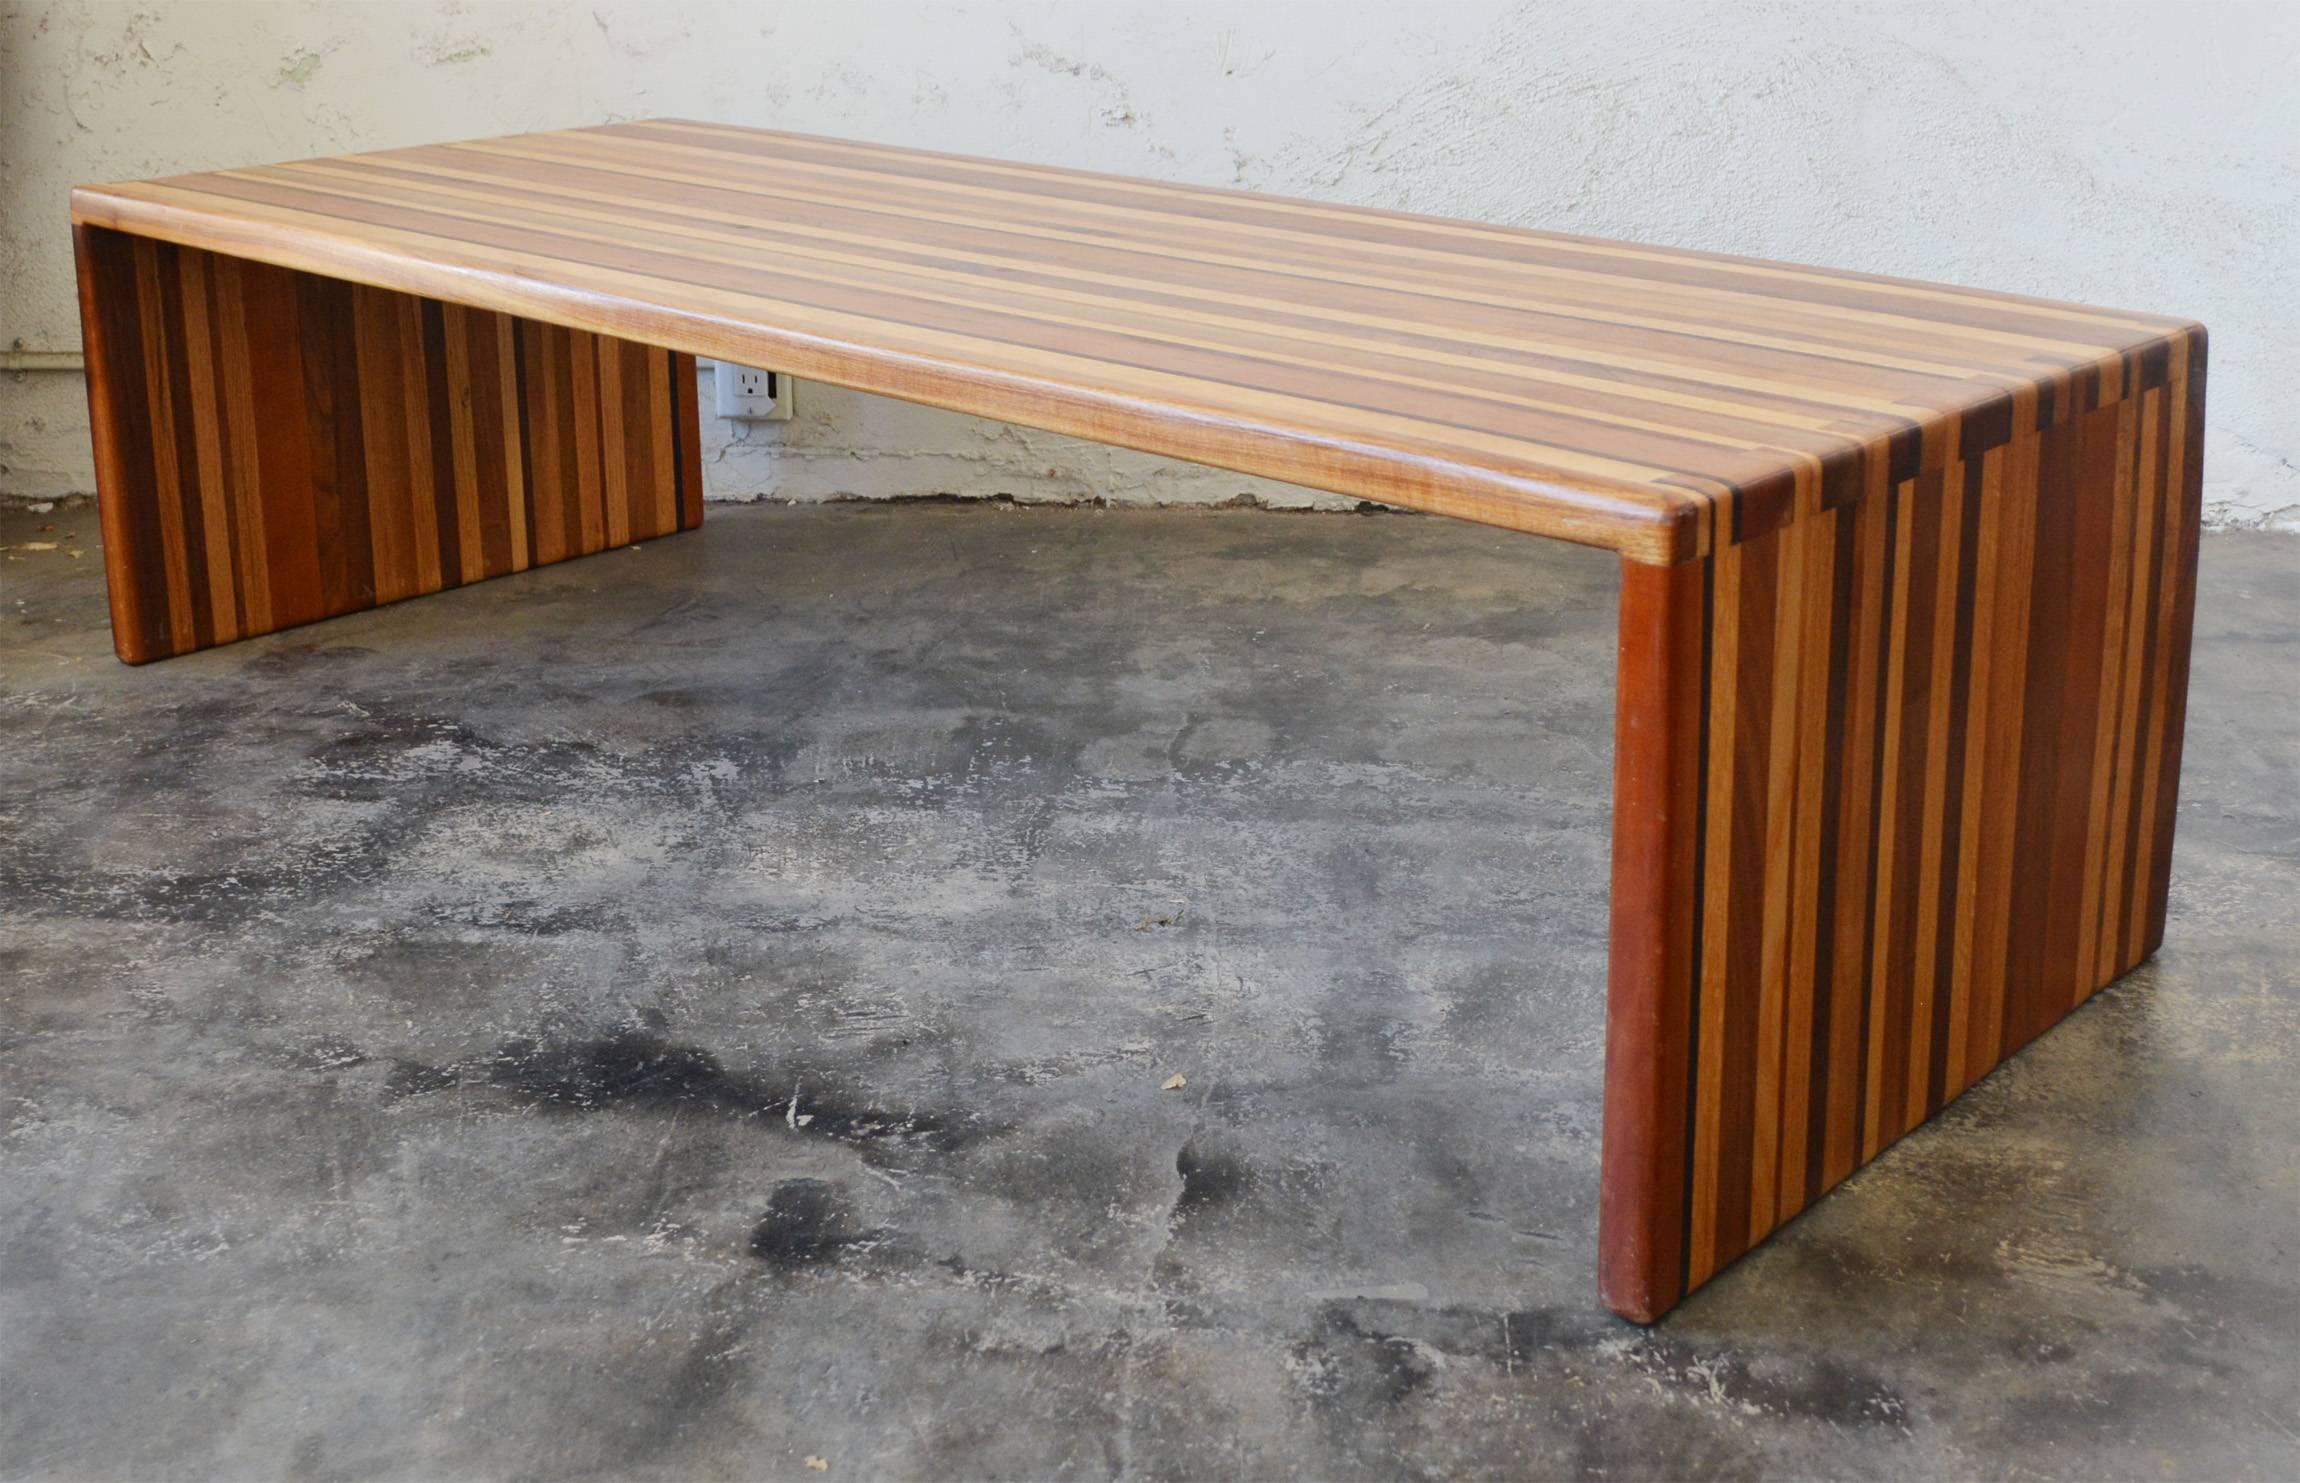 Studio made laminated mixed woods table or bench. This table is made up of at least five different varieties of hardwood. The ends are joined with dovetails. There is a deeper scratch on one side along the top. Contact us for cheaper shipping rates